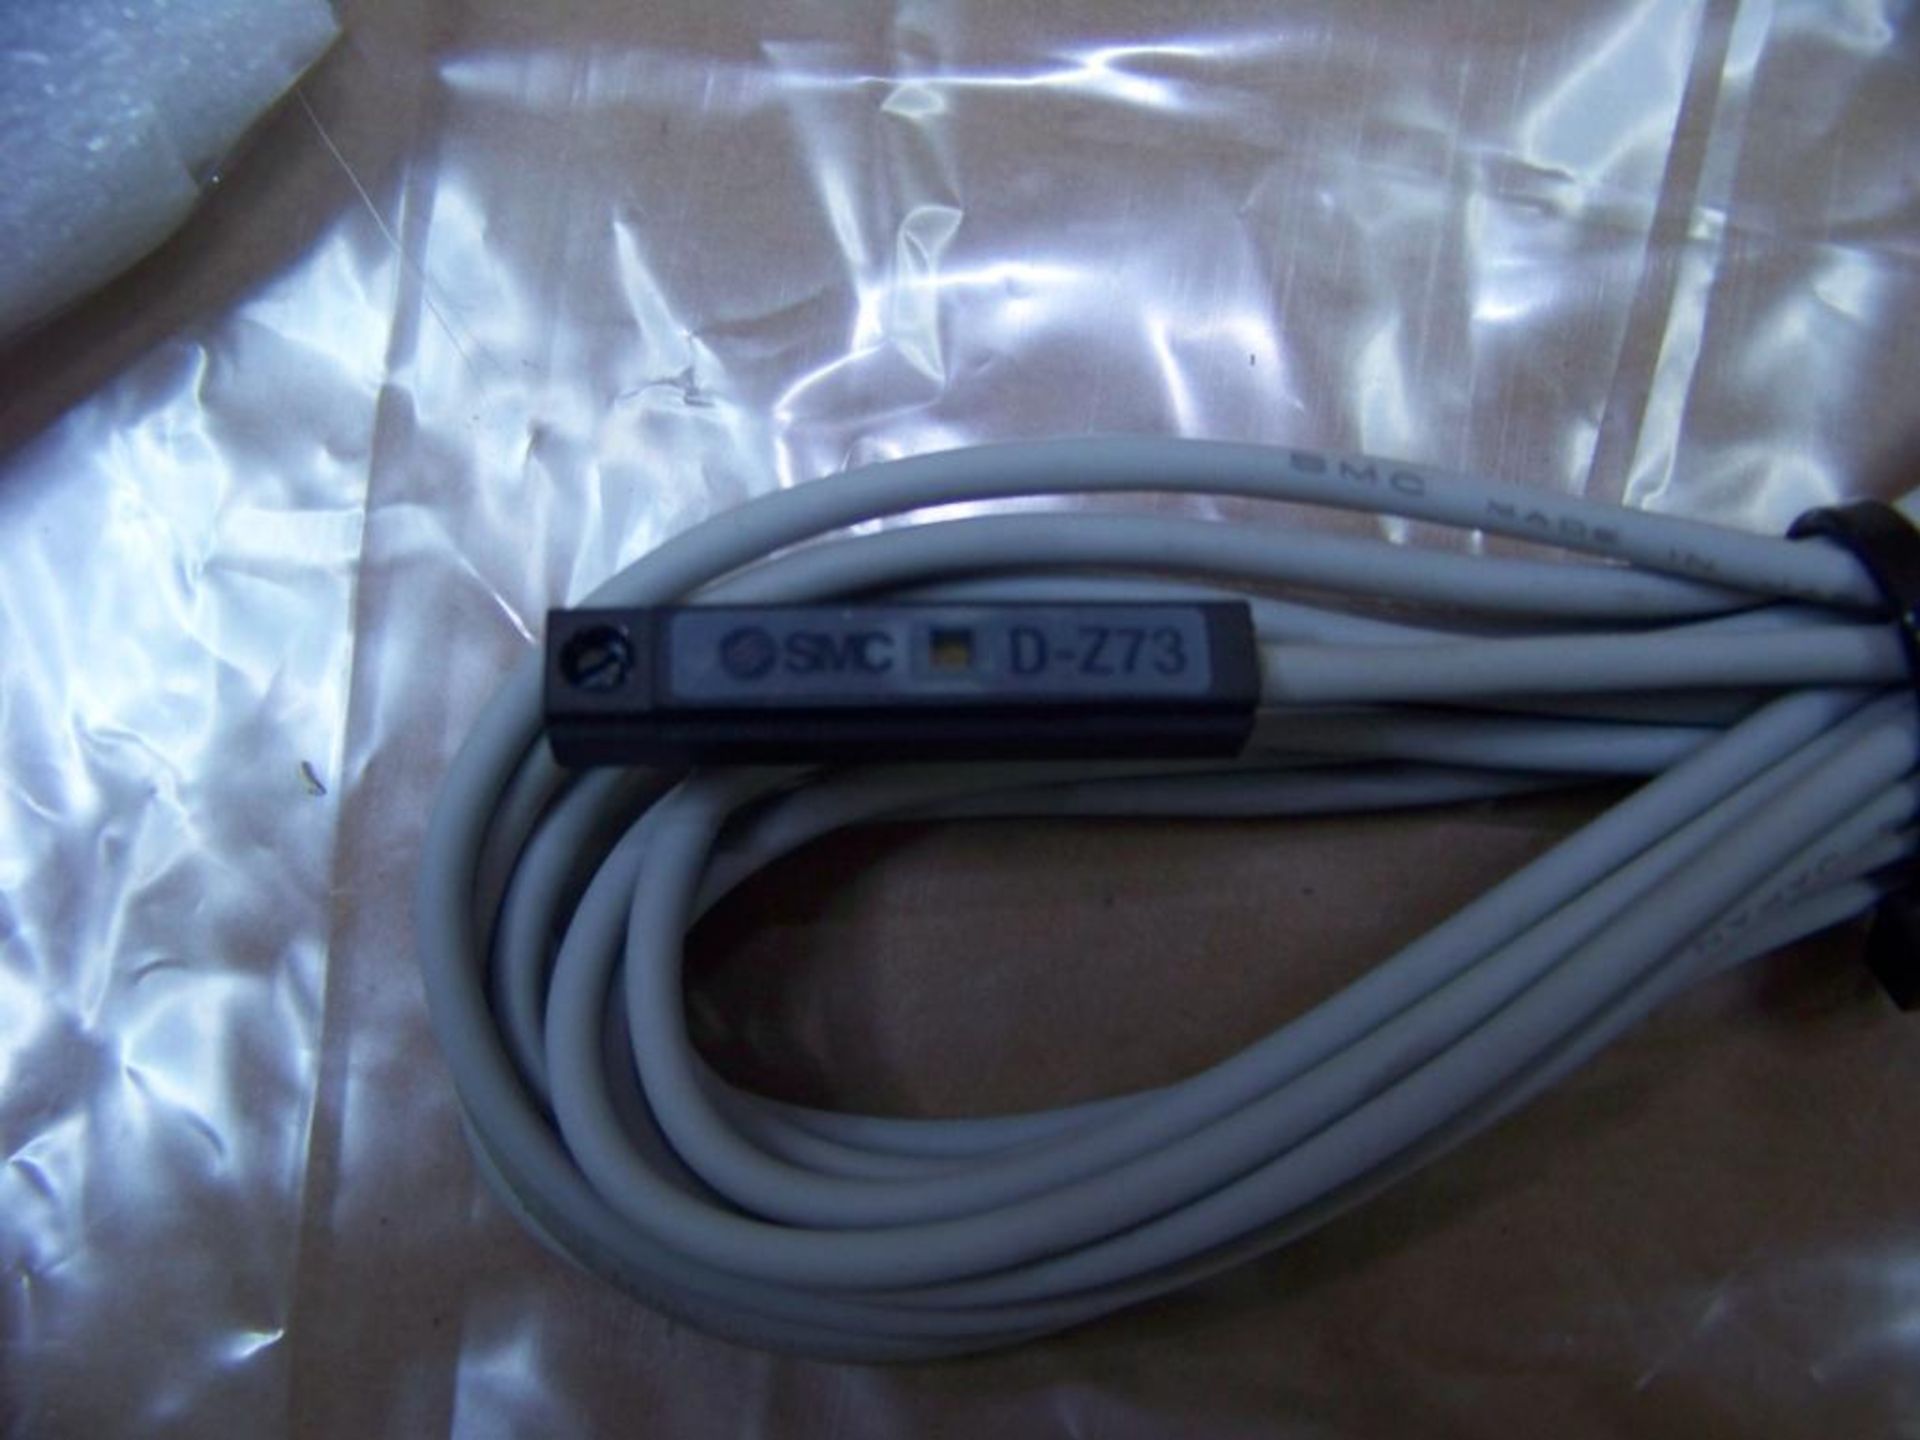 SMC INLINE REED SWITCH, # D-Z73, "NEW" - Image 2 of 2